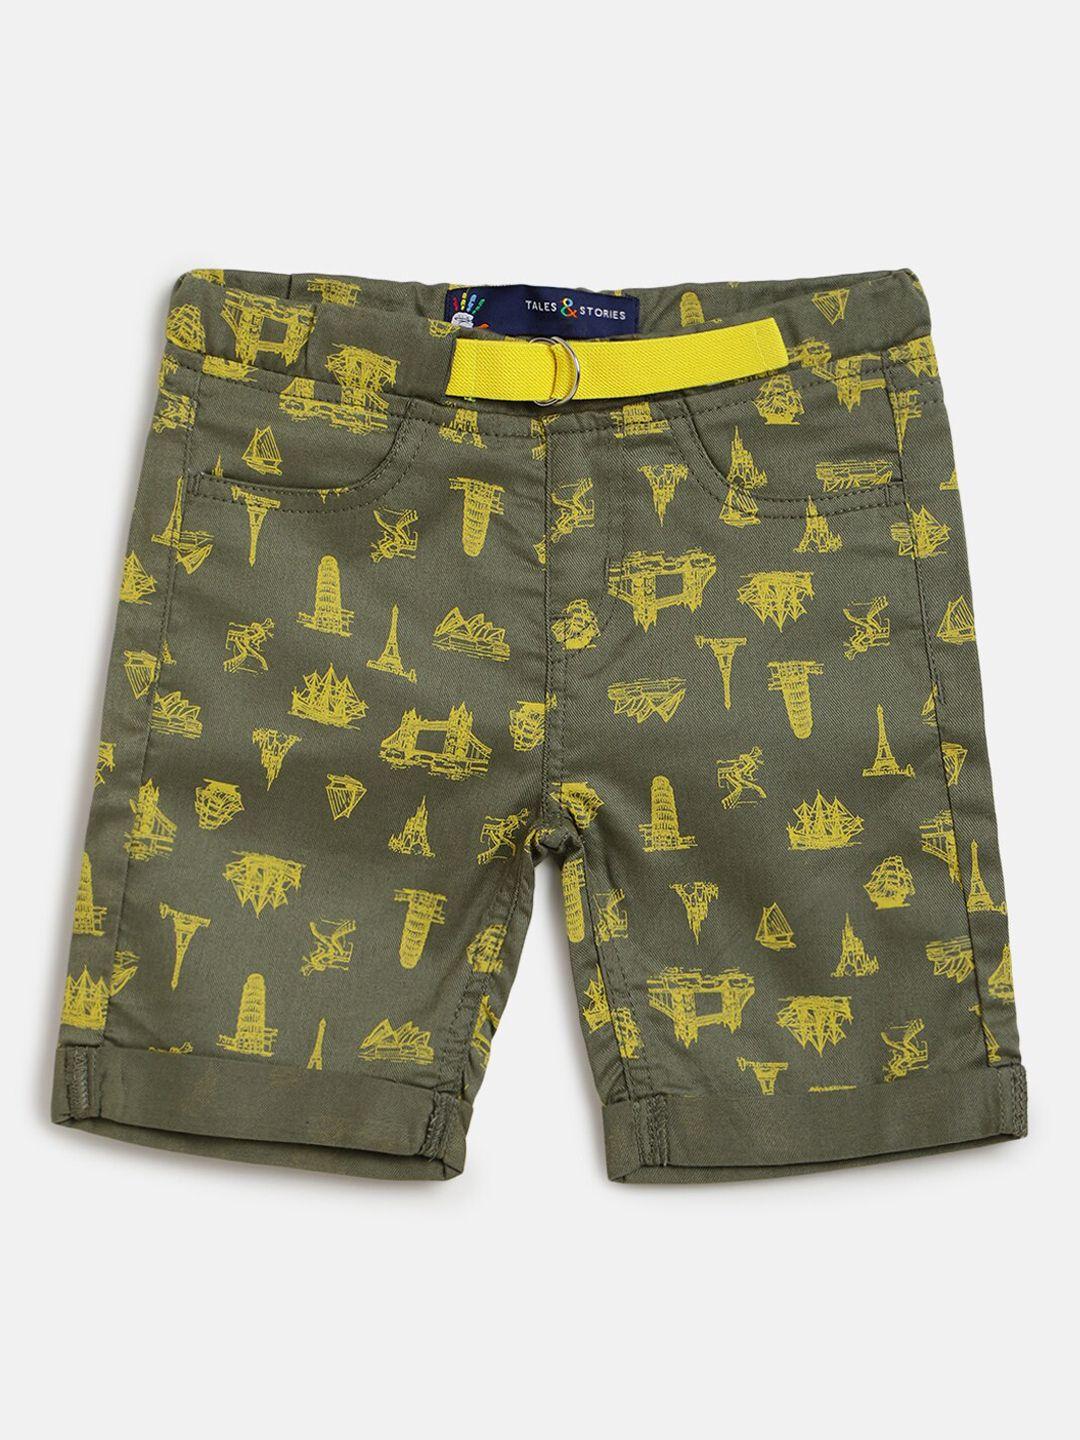 tales-&-stories-boys-olive-green-conversational-printed-cotton-shorts